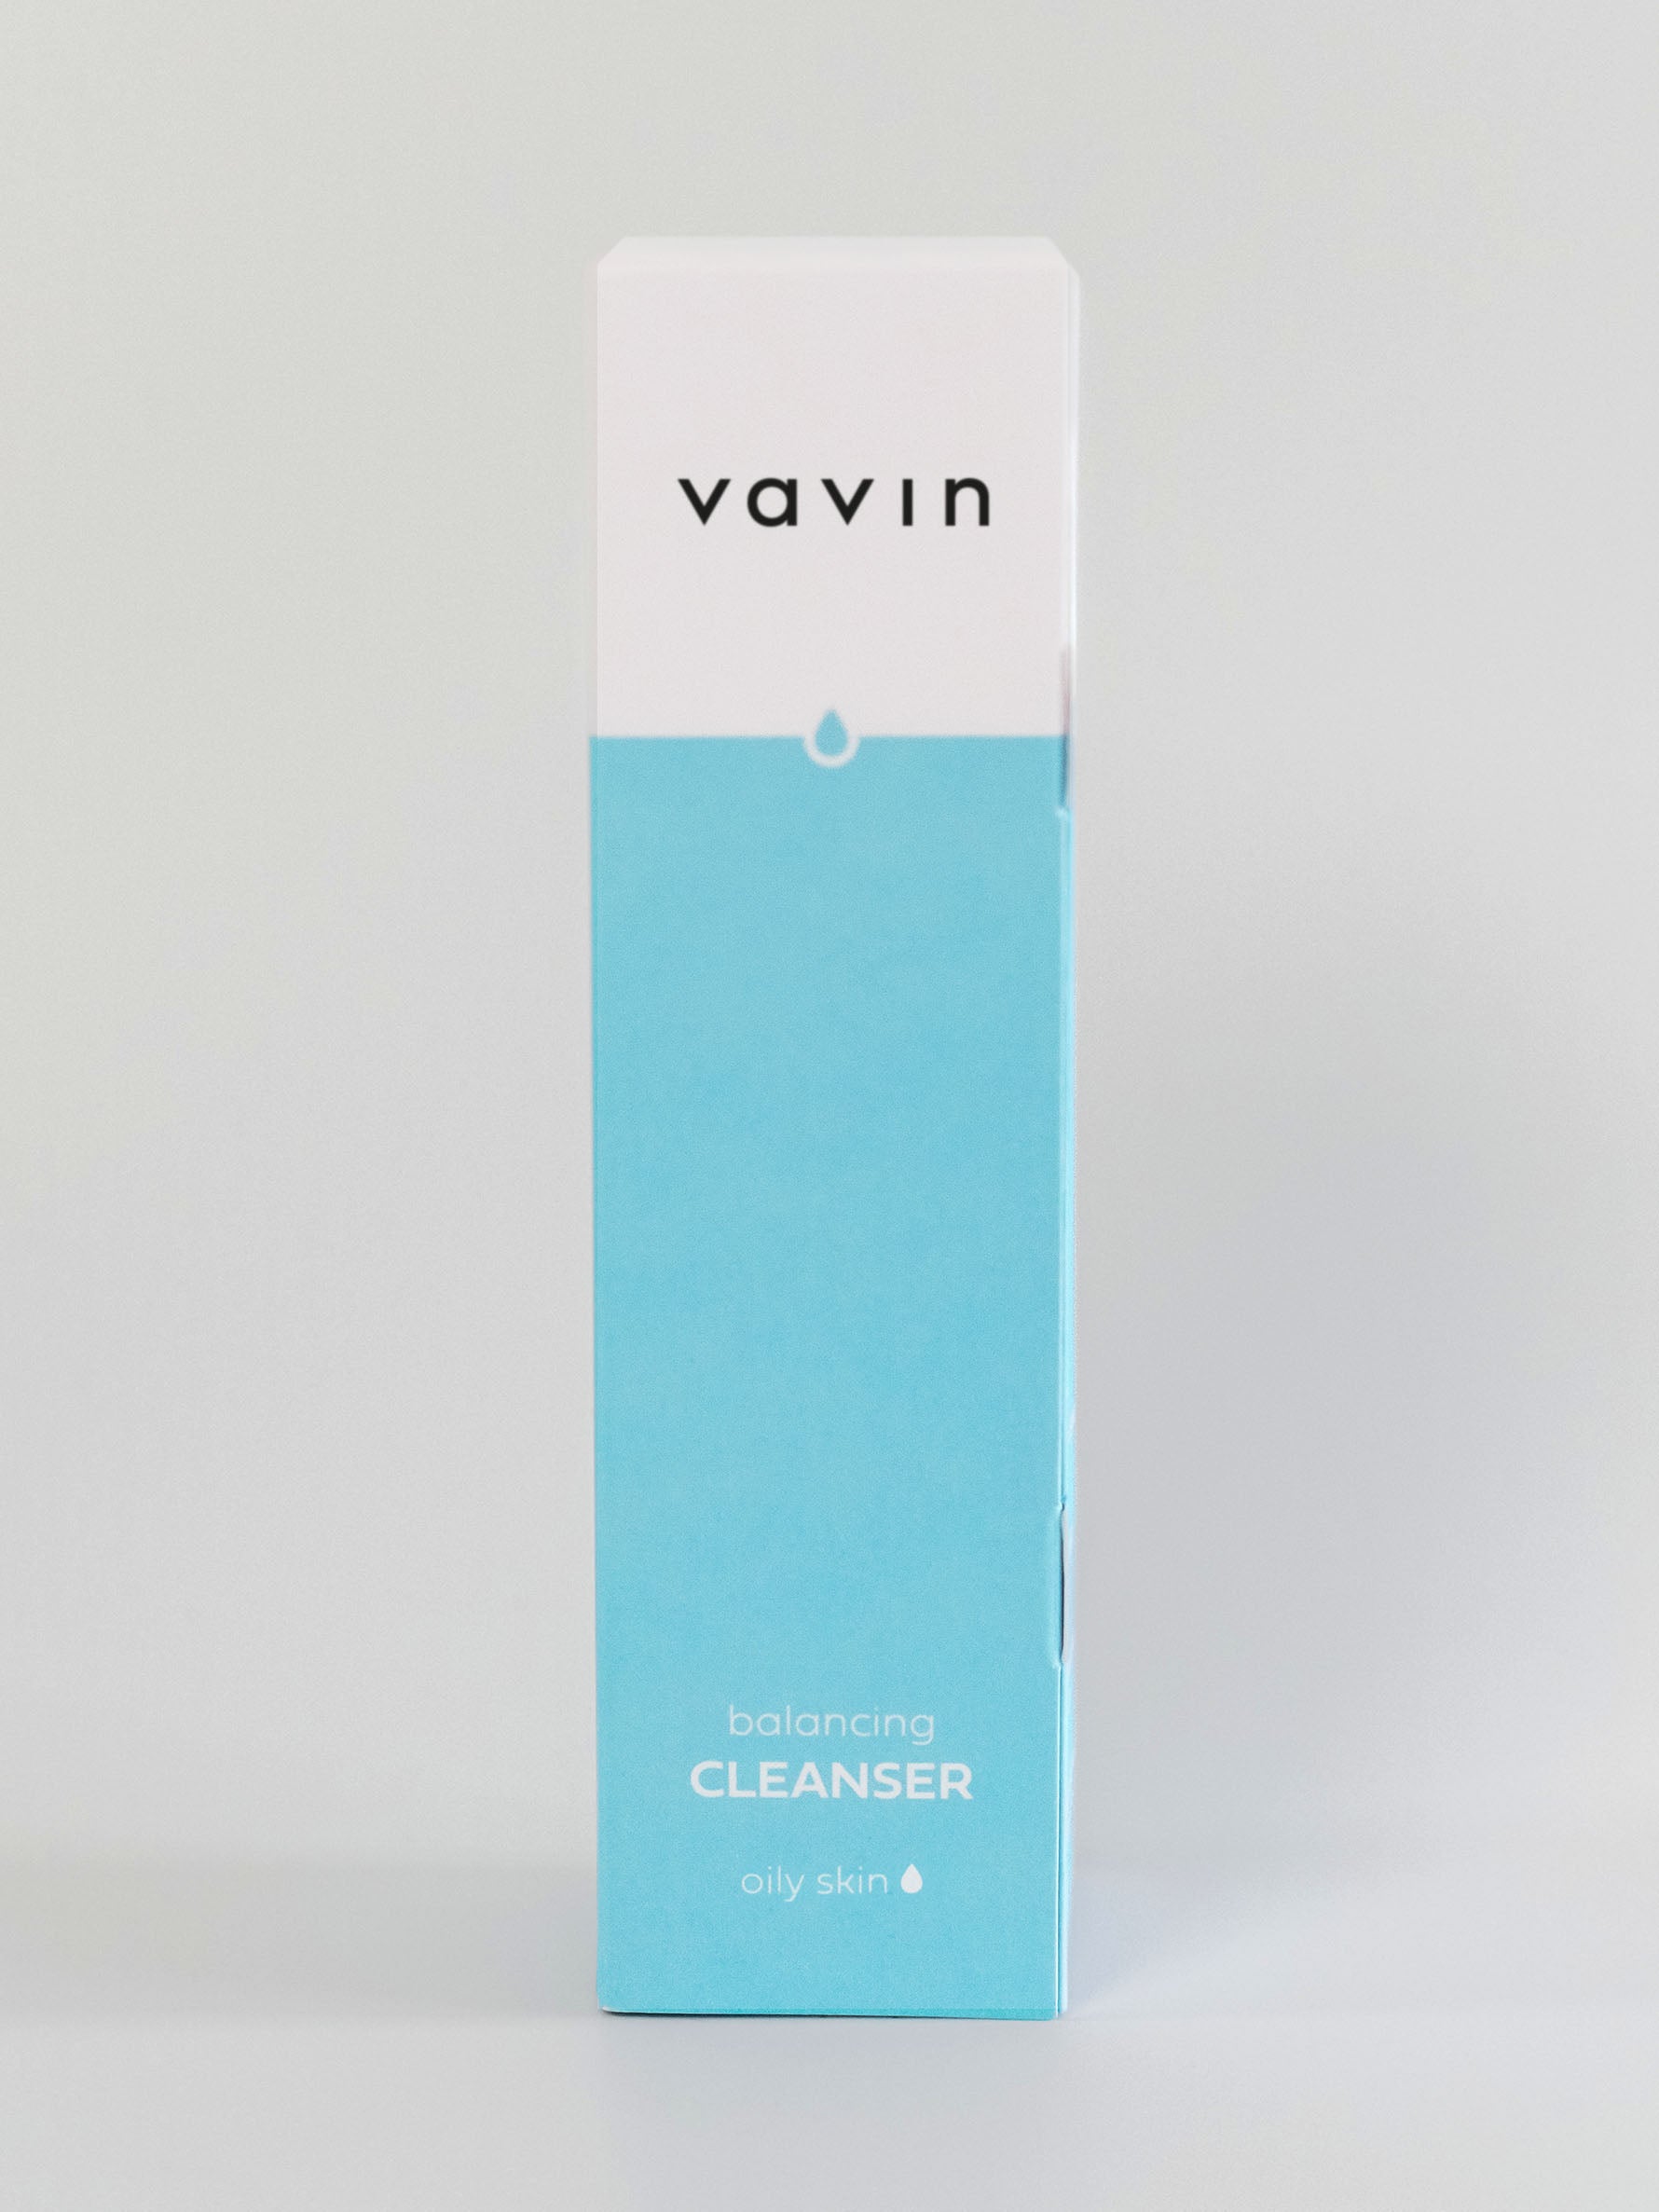 Balancing Cleanser - Oily Skin (170ml)